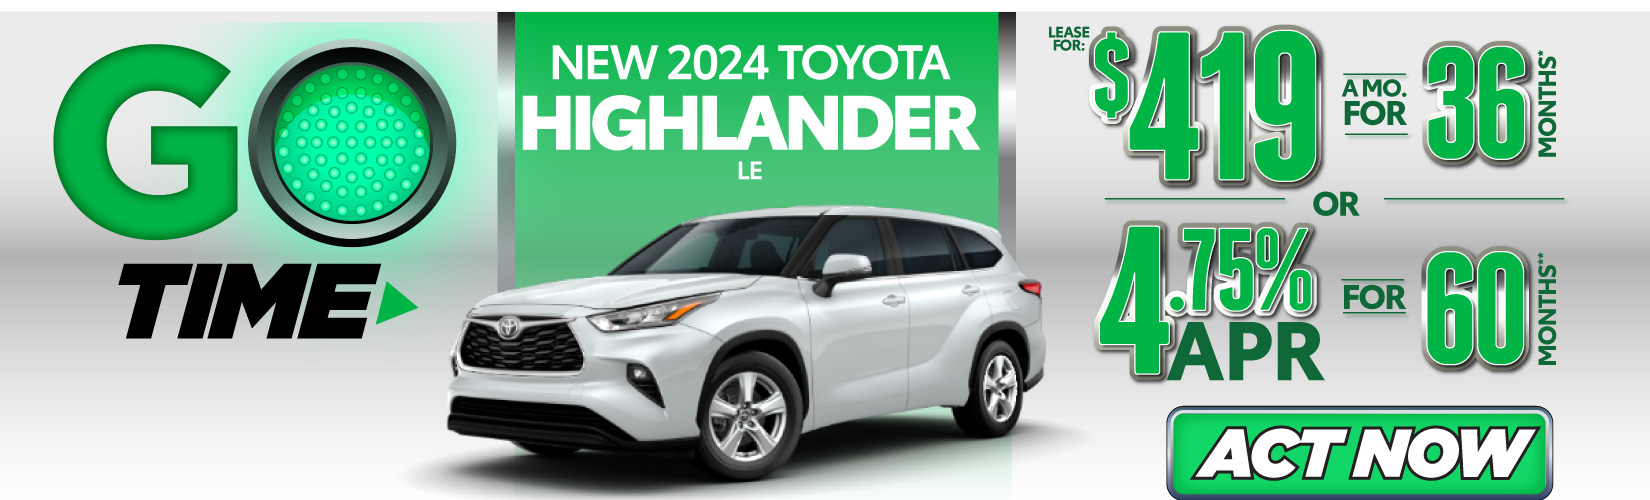 New 2023 RAV4 LE - Lease for $359 a month for 36 months*